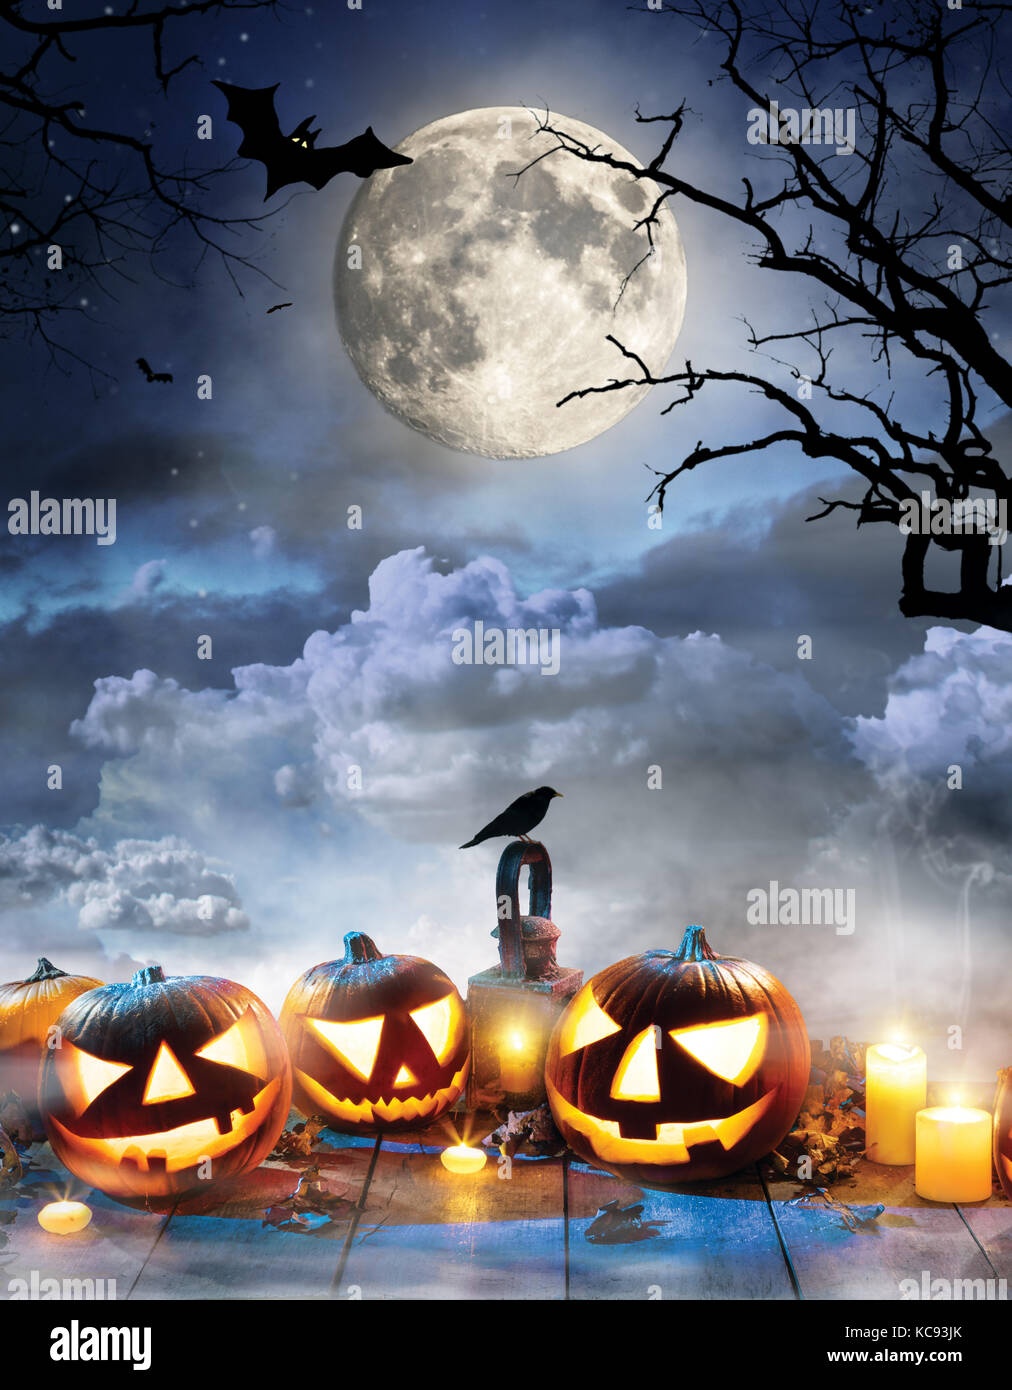 Spooky halloween pumpkins on wooden planks with dark horror background.  Celebration theme, copyspace for text. Very high resolution image Stock  Photo - Alamy